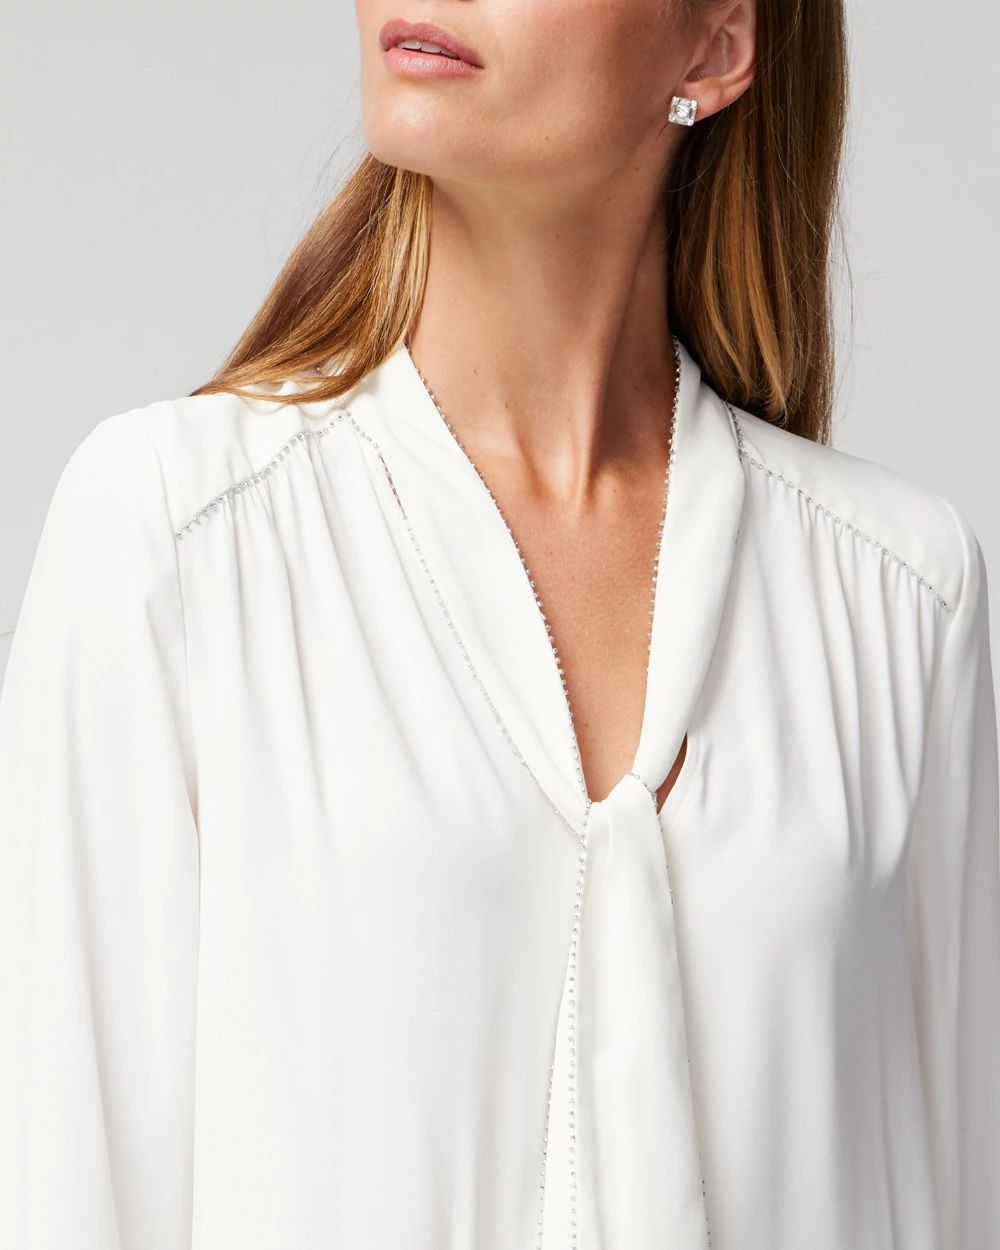 Long Sleeve Tie V-Neck Blouse click to view larger image.